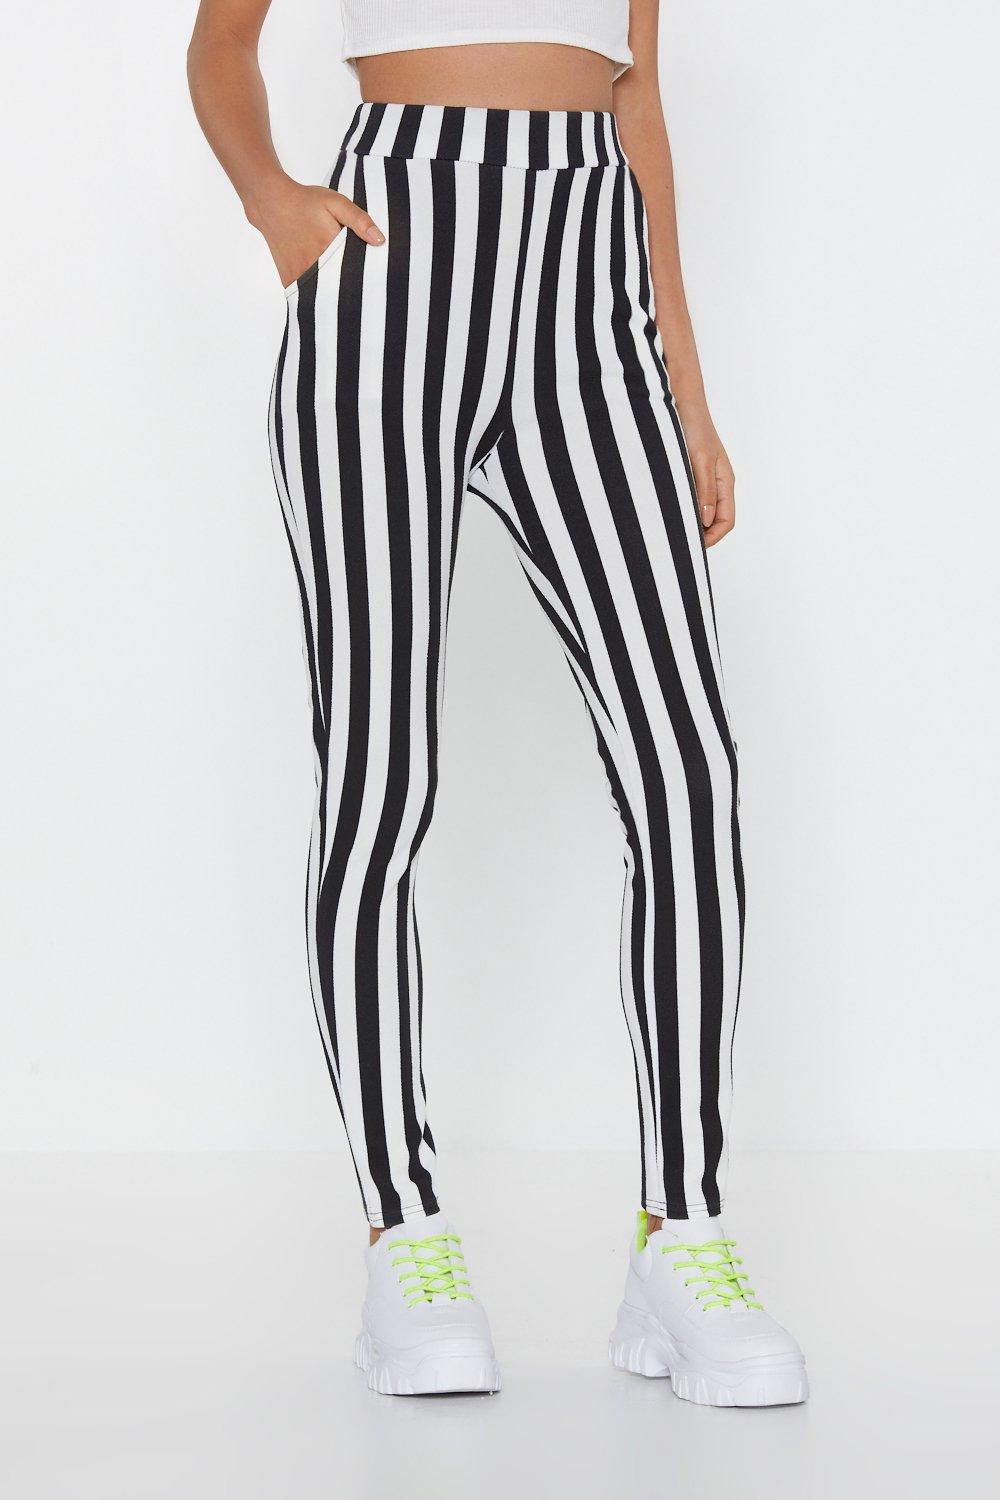 Line Your Pockets Striped Leggings